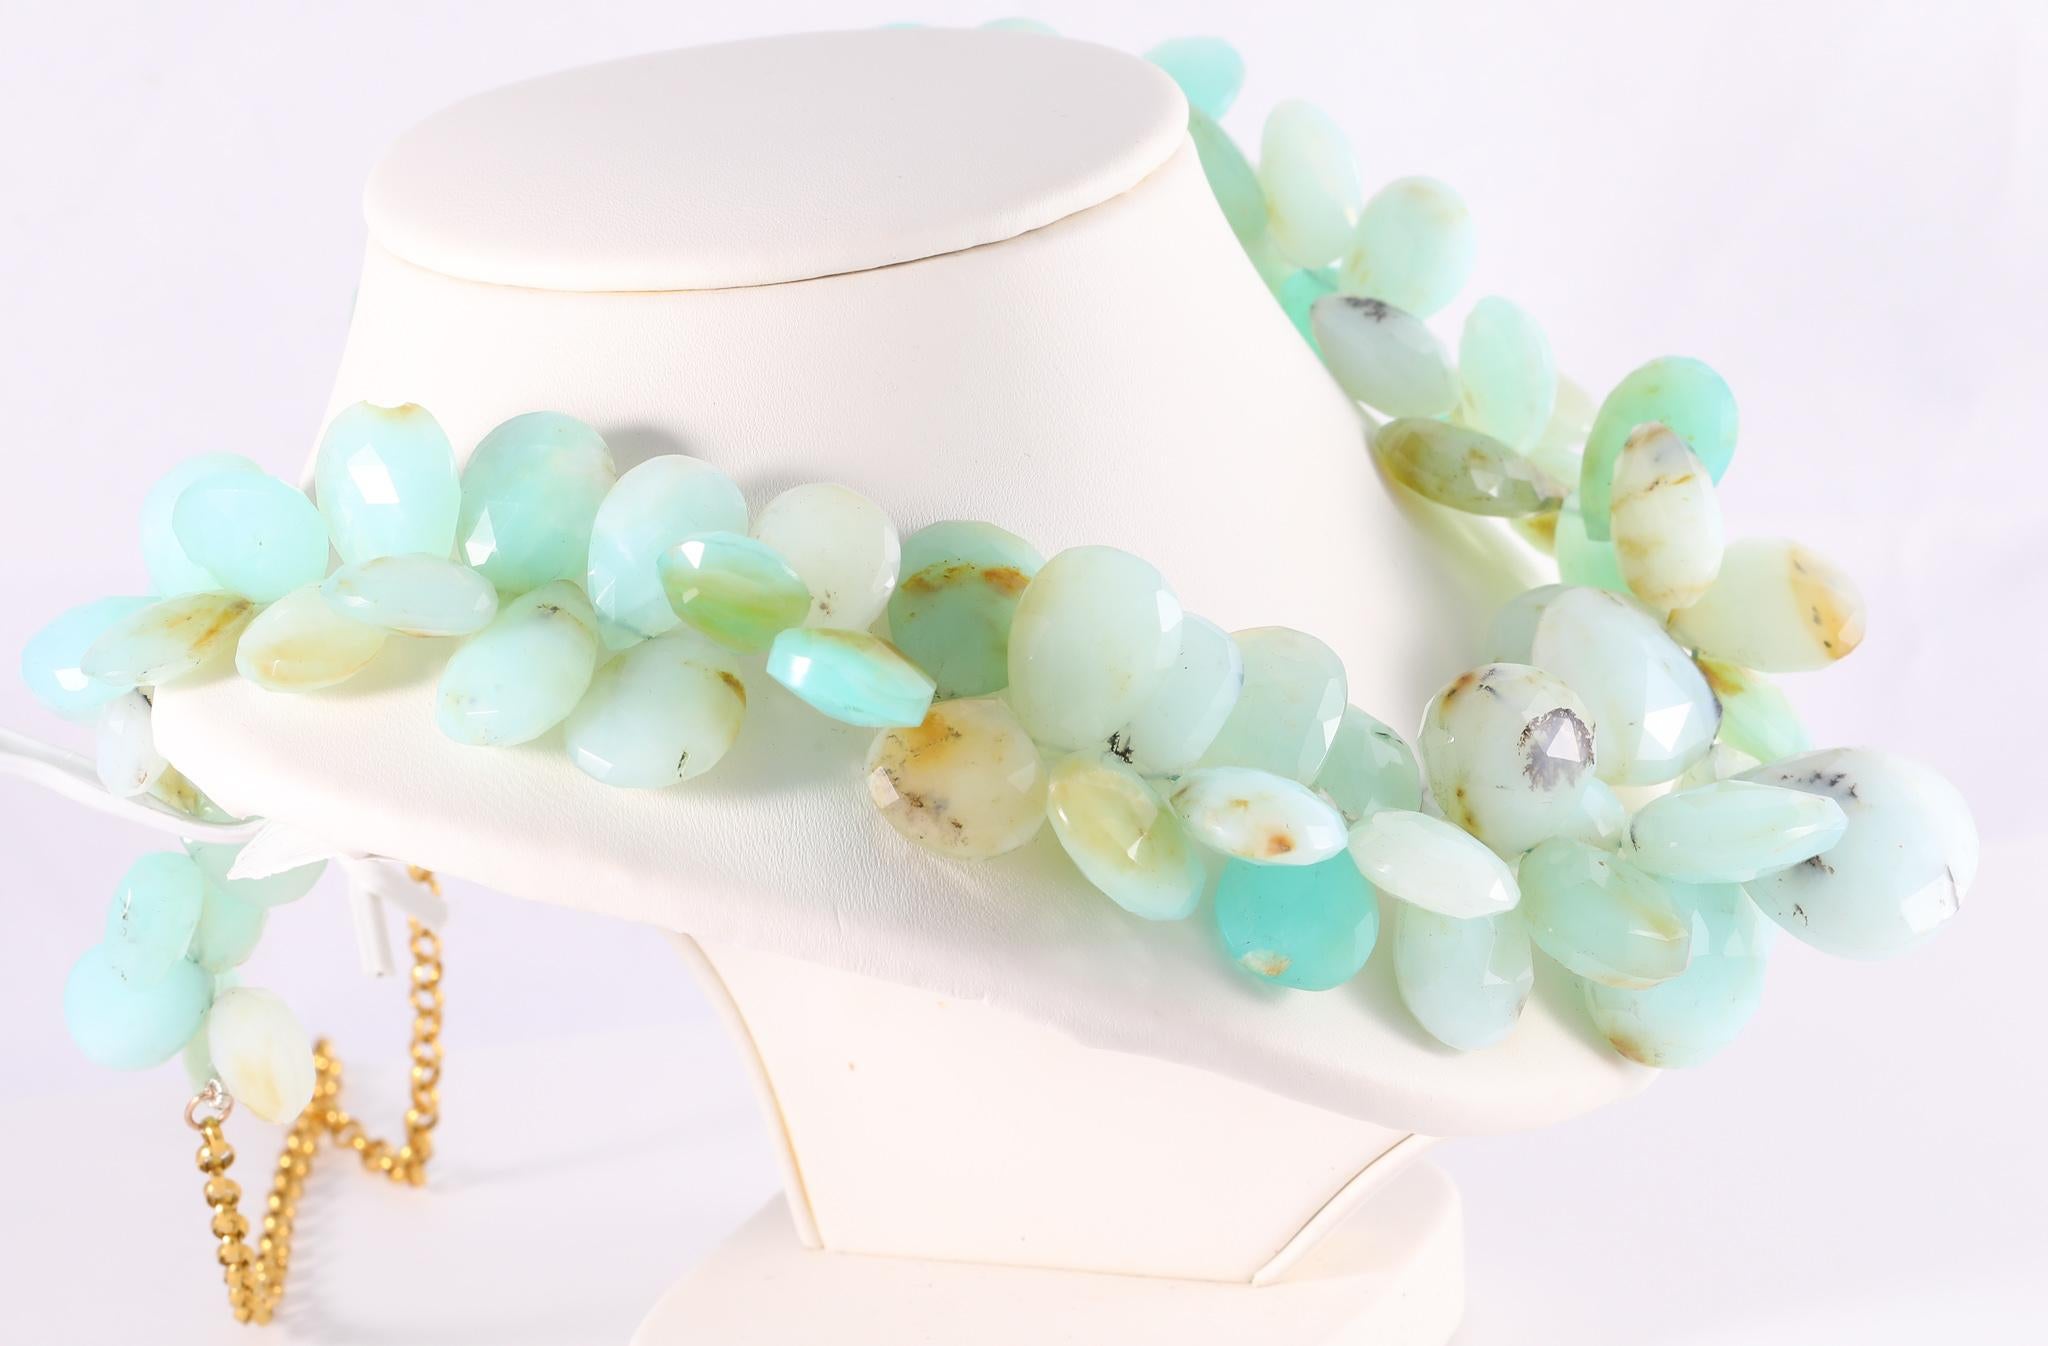 This dazzling cluster of natural Peruvian opal beads is like the colors of the Caribbean ocean. The faceted briolettes sparkle and shine. Feel like you're on vacation, or take it to the tropics, either way you'll always feel a breath of fresh air